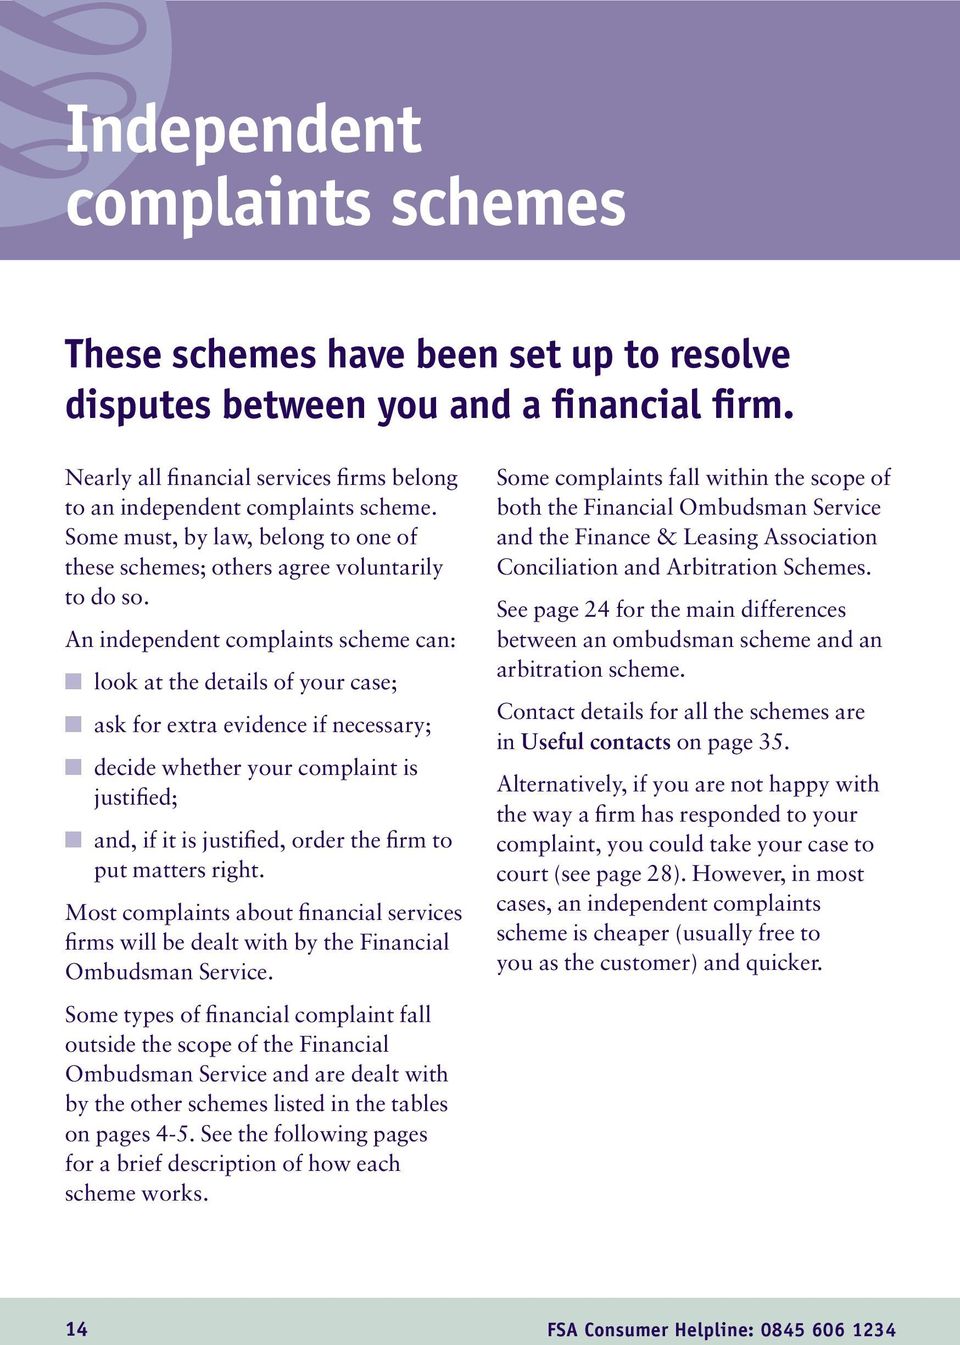 An independent complaints scheme can: look at the details of your case; ask for extra evidence if necessary; decide whether your complaint is justified; and, if it is justified, order the firm to put